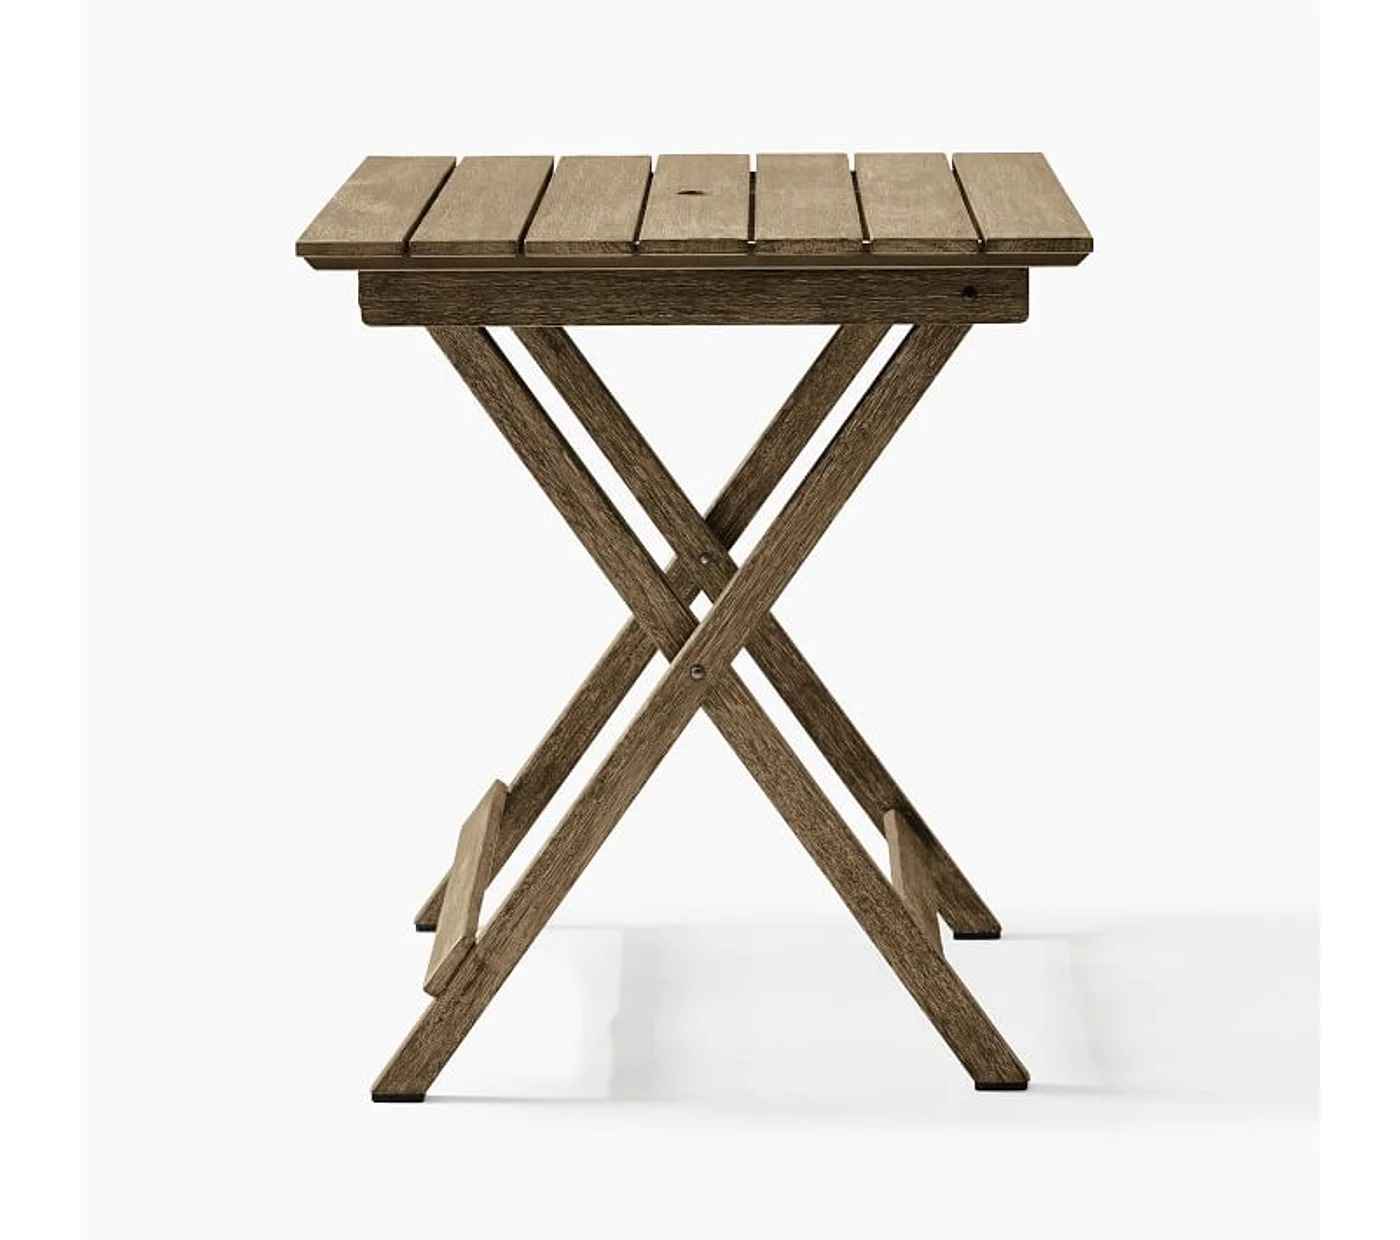 Ortside Folding Bistro Table